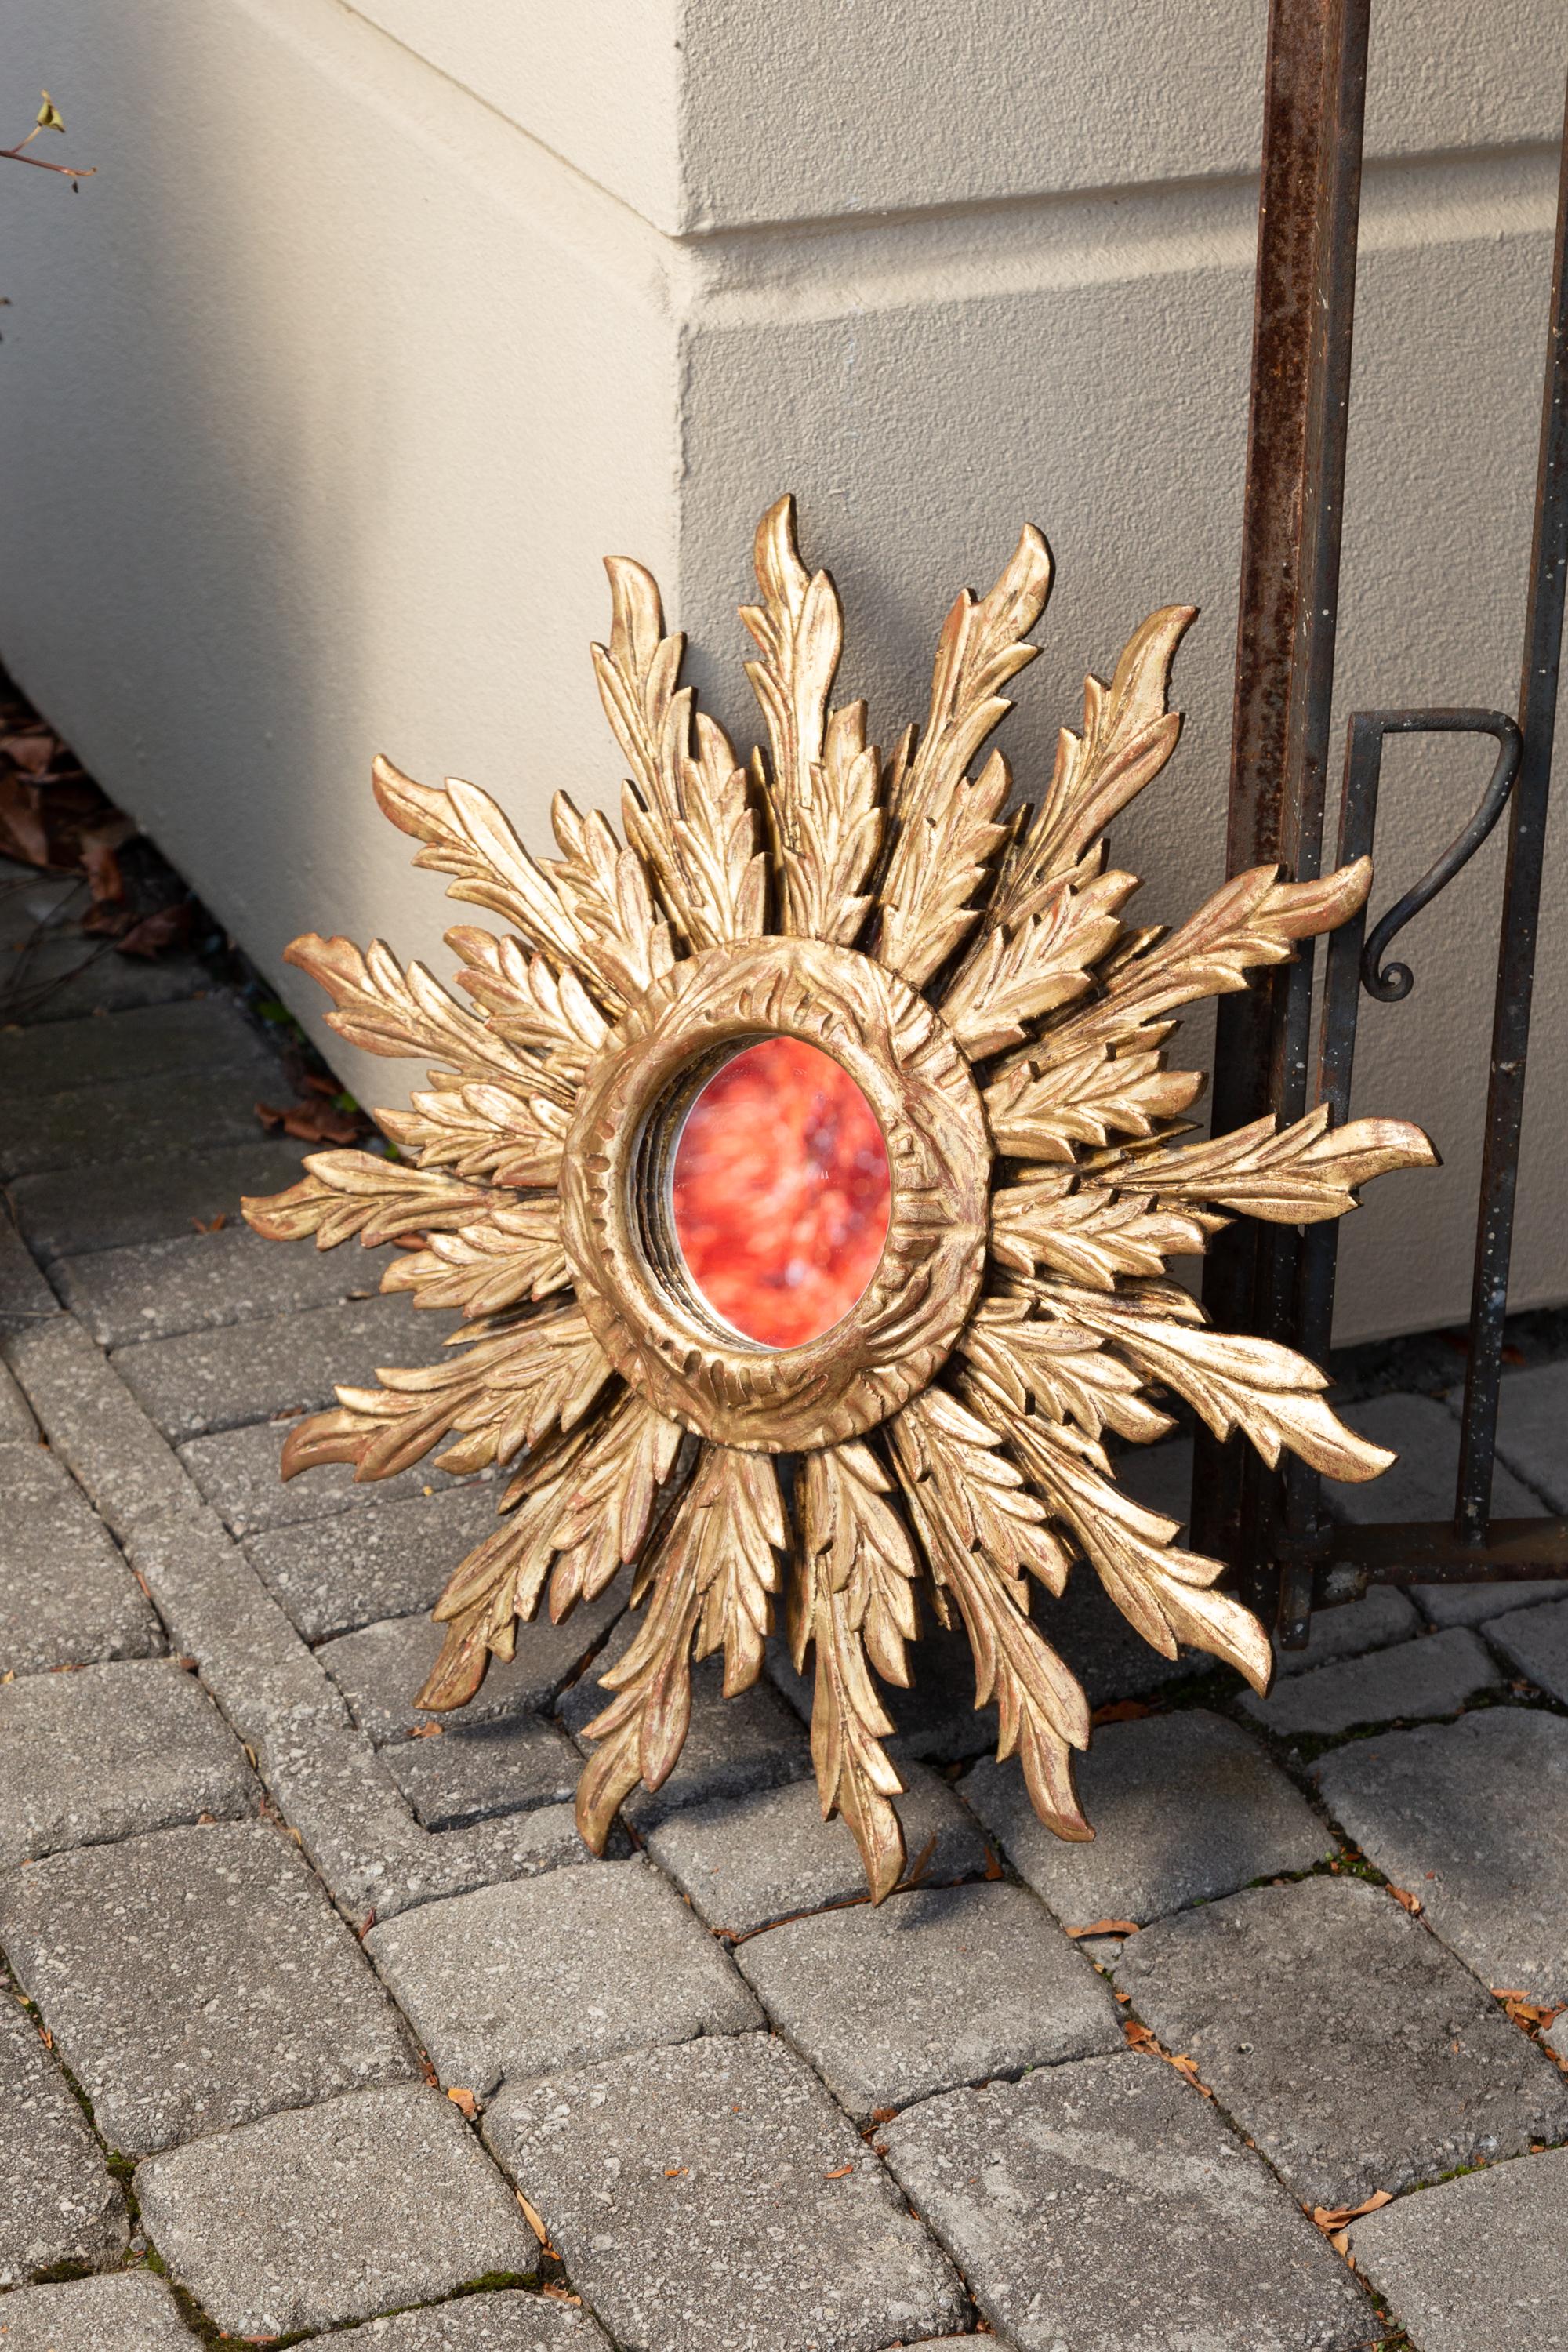 Mid-Century Modern French Giltwood Sunburst Mirror with Wavy Sunrays from the Mid-20th Century For Sale